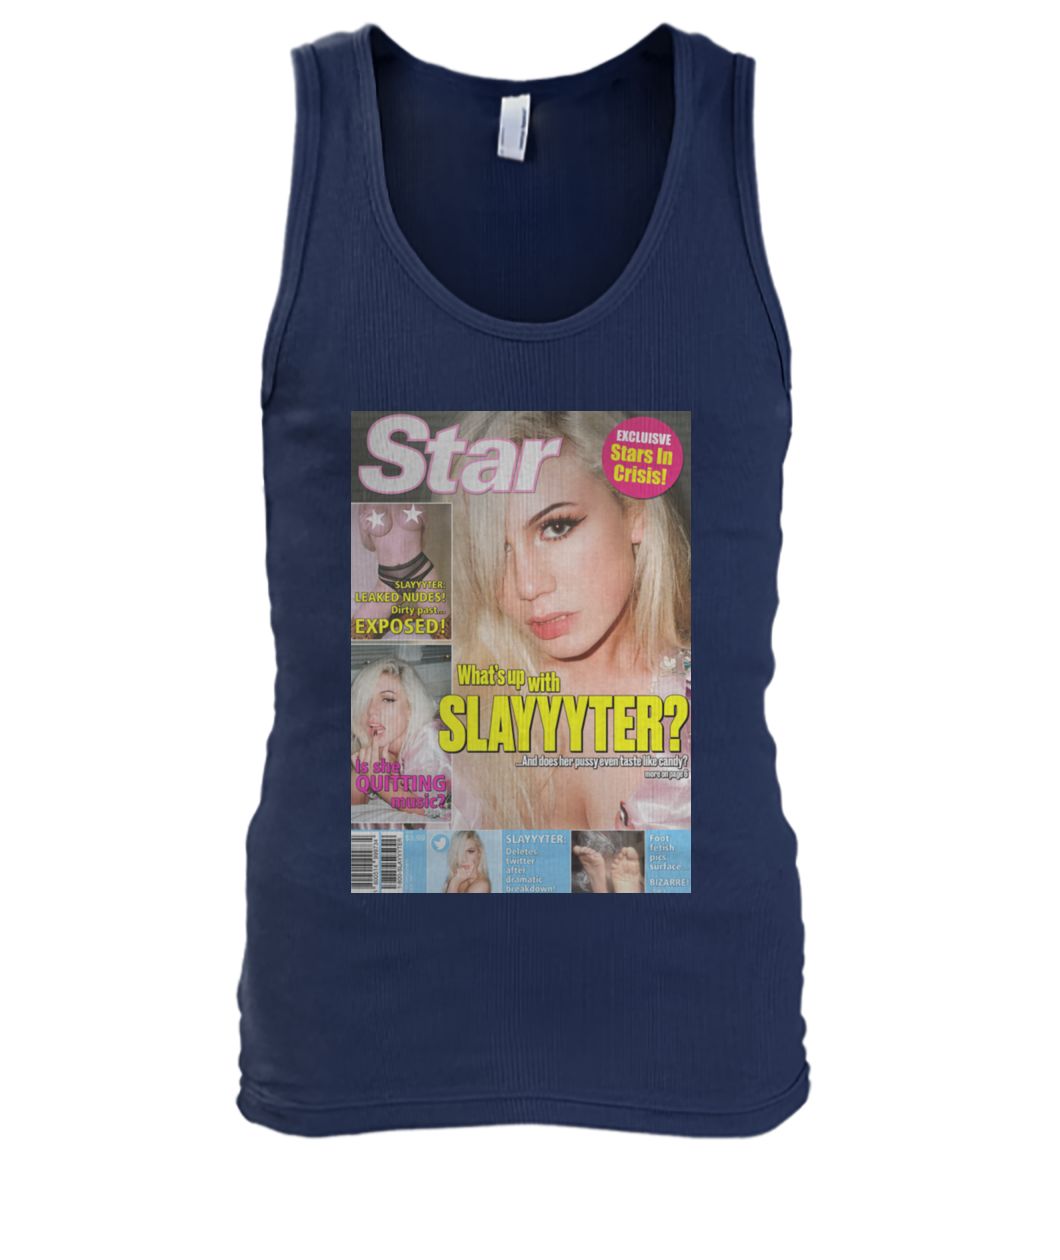 Slayyyter star cover what's up with slayyyter men's tank top